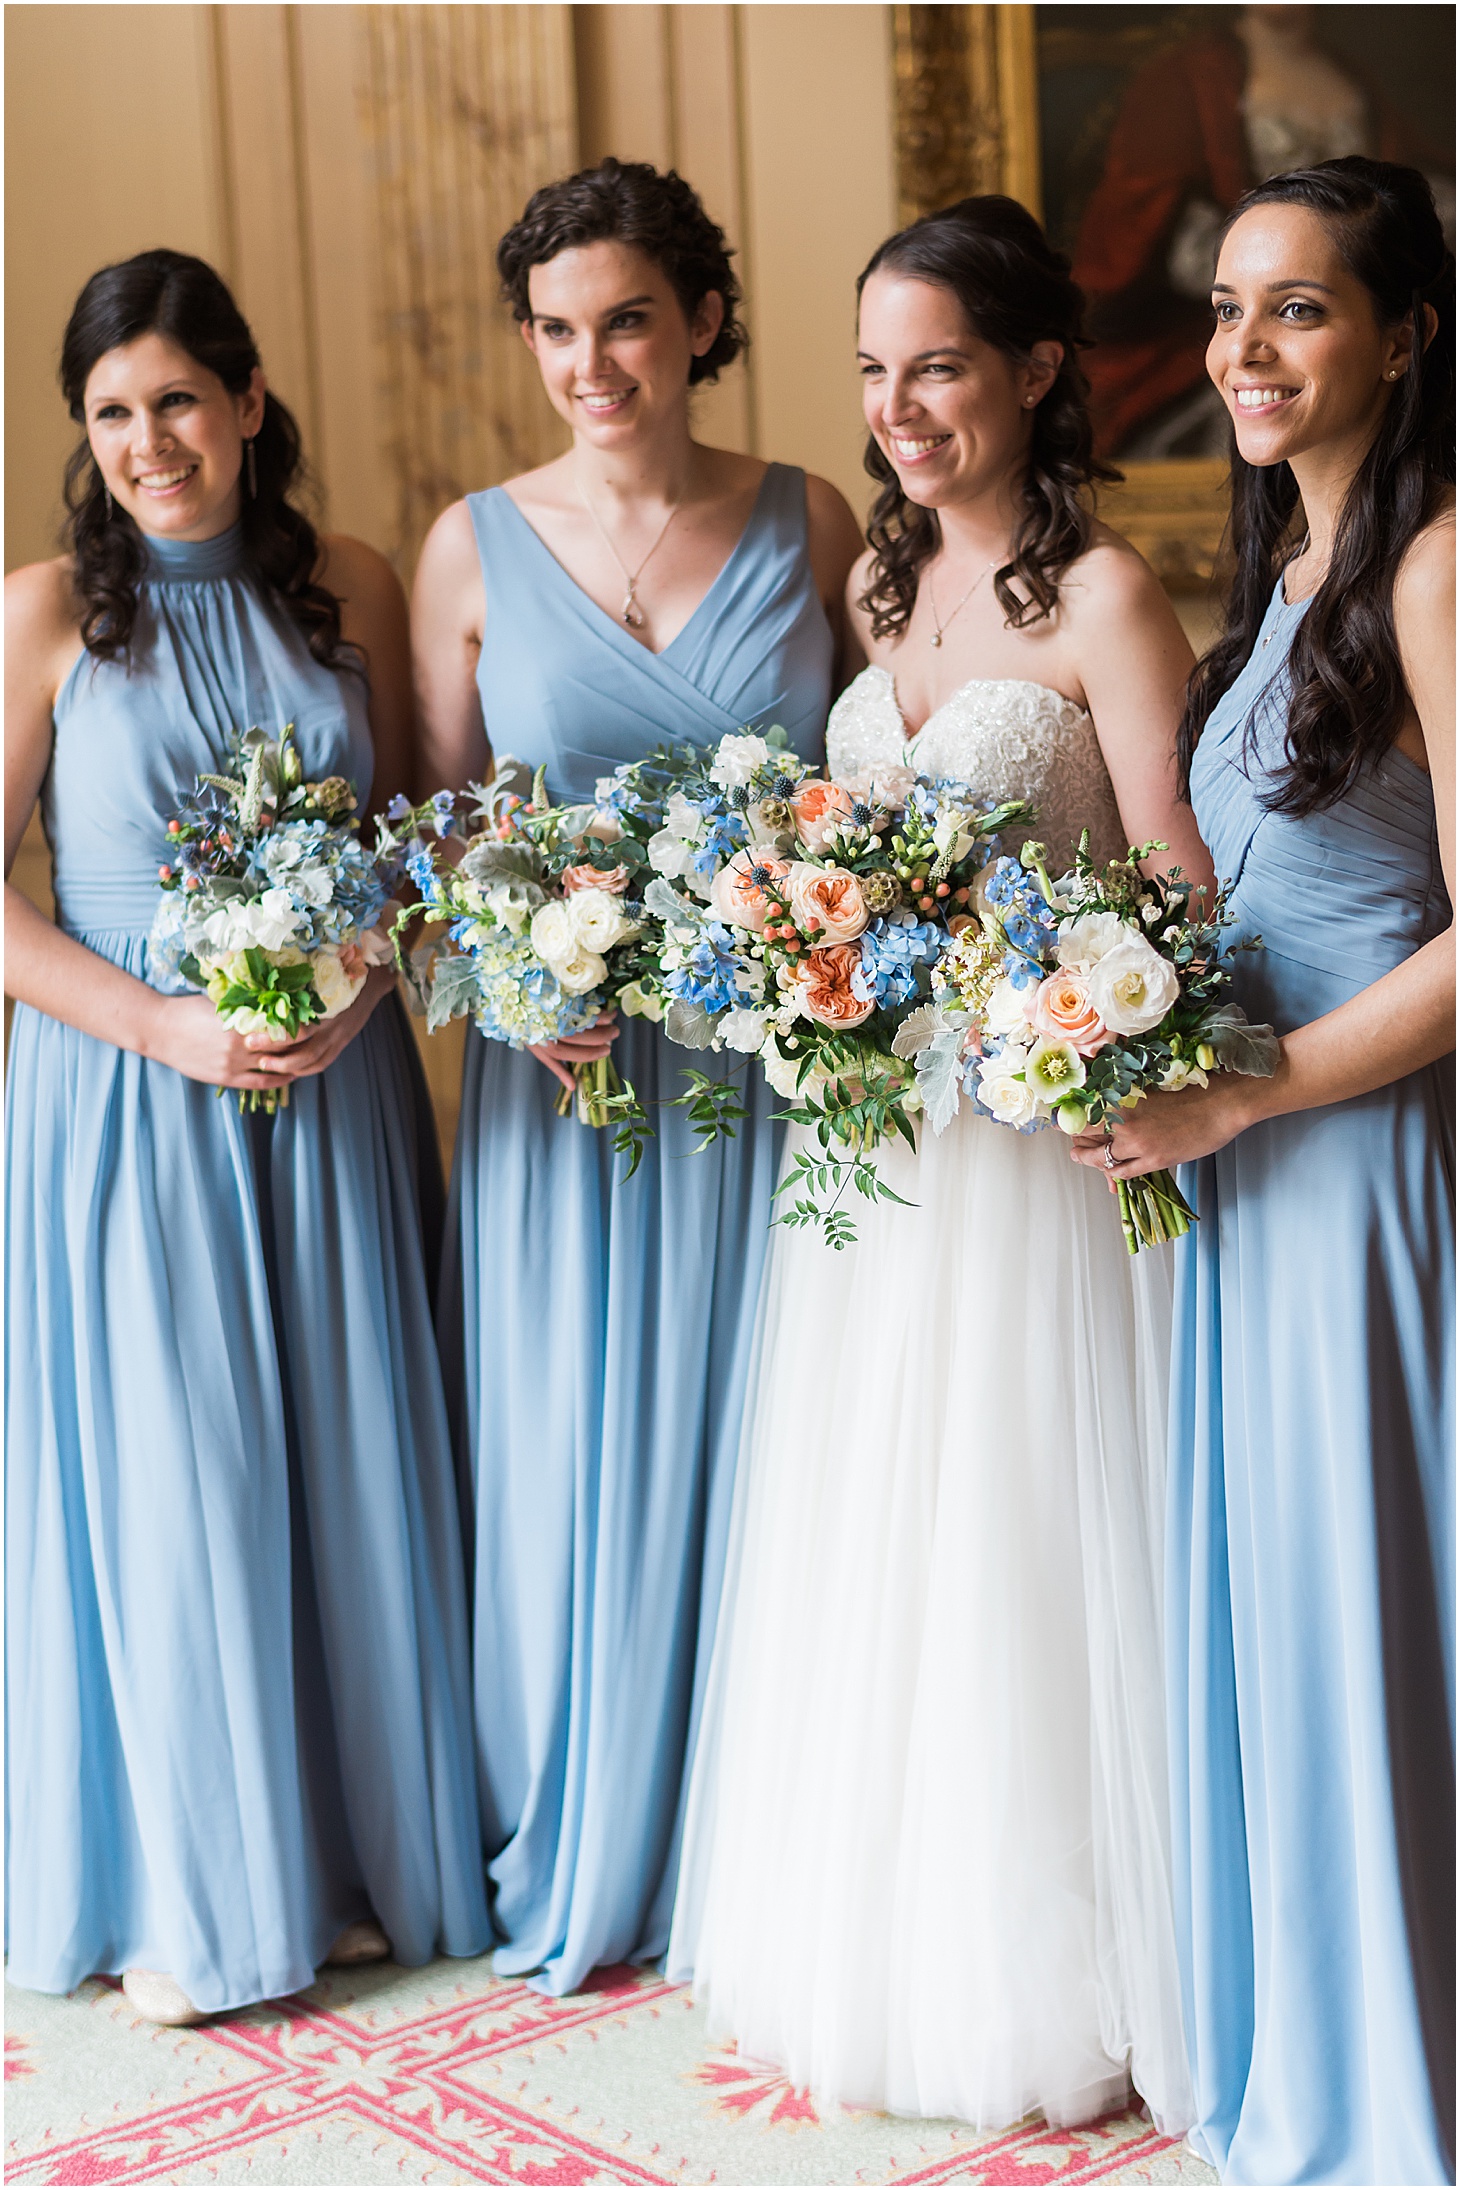 Bridal Party Portraits at National Museum of Women in the Arts, Kimpton Donovan Hotel, Blue Minted Wedding Suite, Dusty Blue and Pink Jewish Wedding at Women in the Arts, Sarah Bradshaw Photography, DC Wedding Photographer 